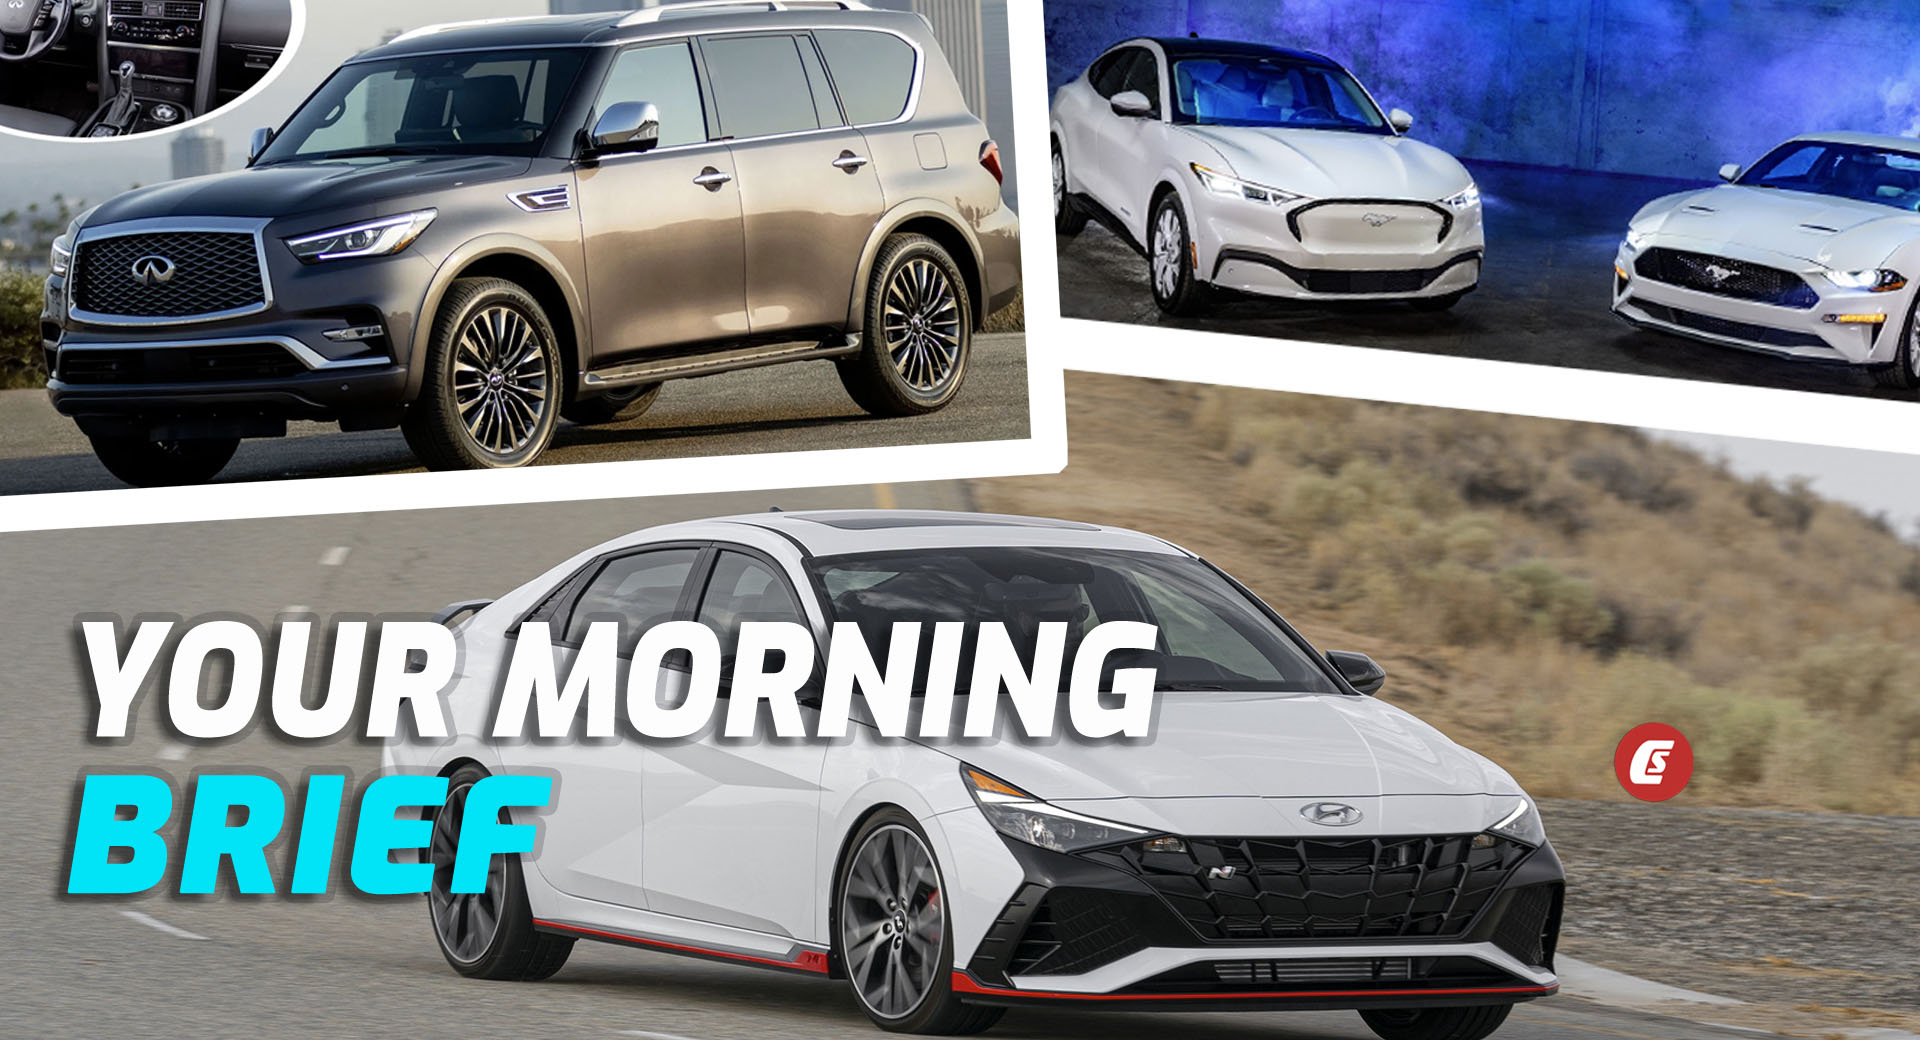 2022 Hyundai Elantra N Revealed, Infiniti QX80 Gets A Tech Update, And Ford Shows New Special Ice White Mustangs: Your Morning Brief